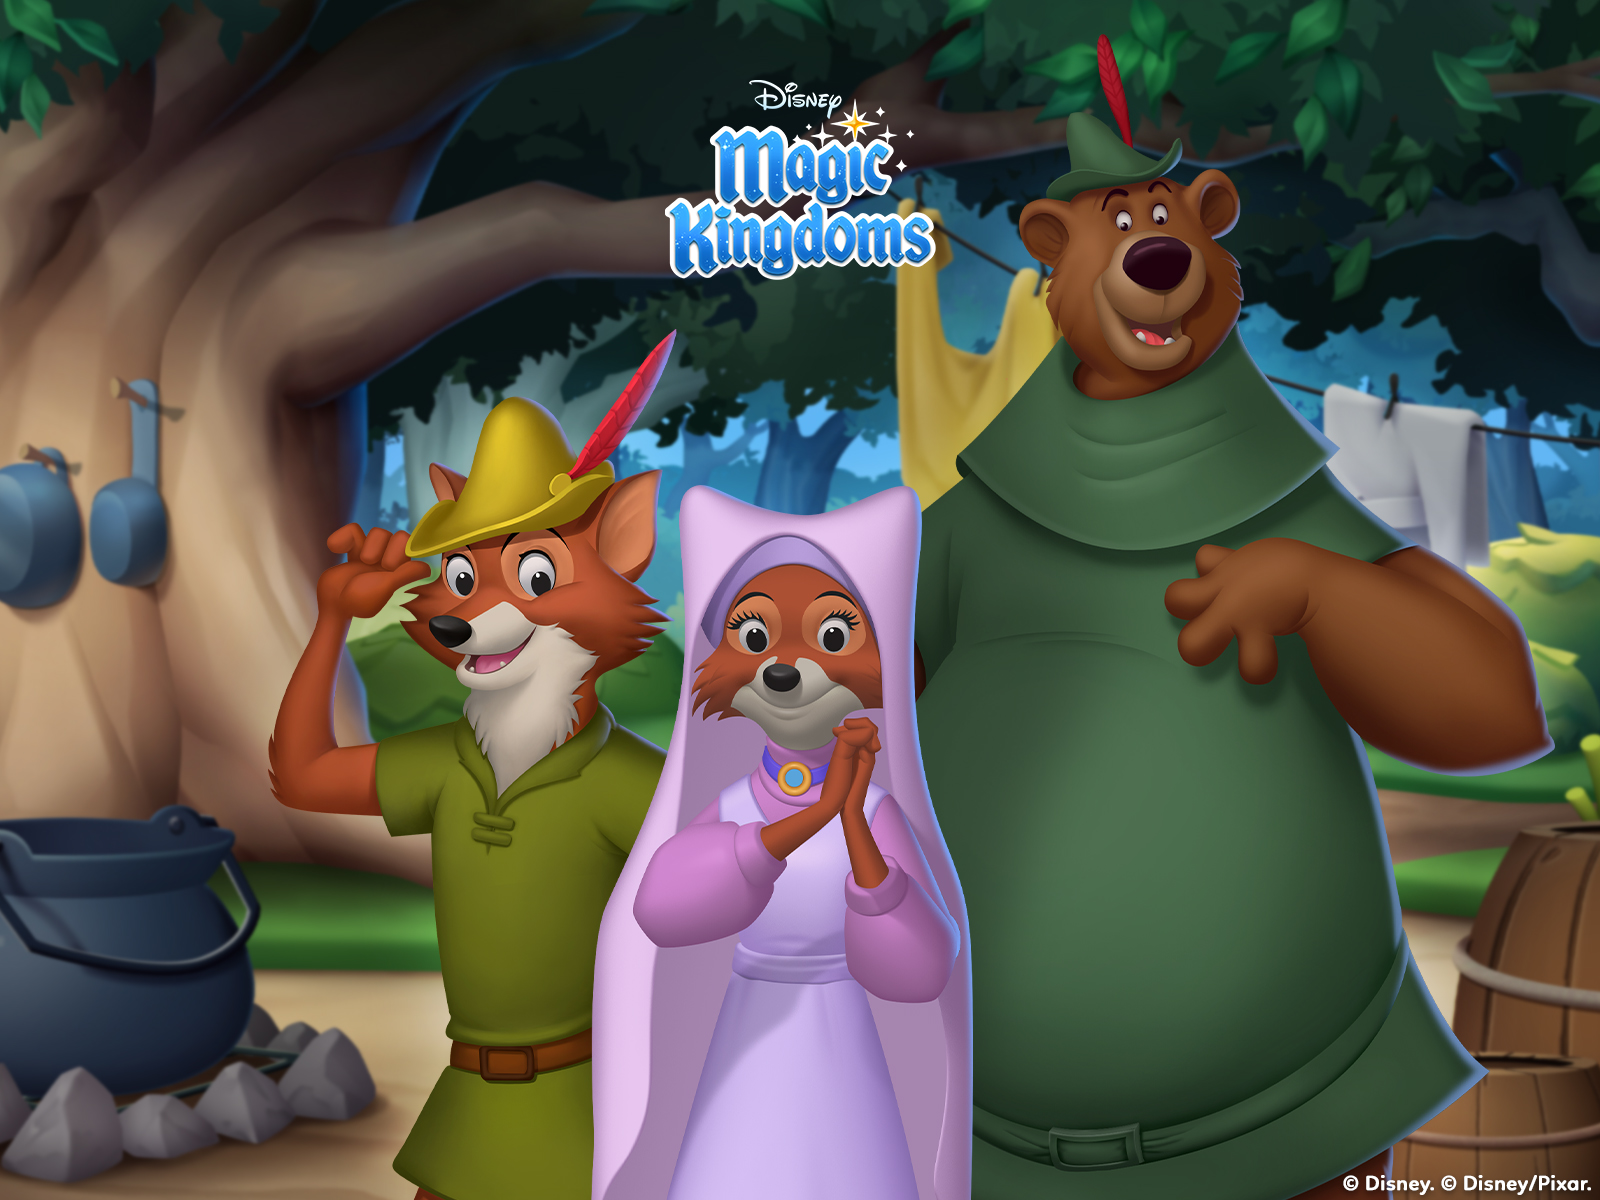 Disney Magic Kingdoms's time for another adventure, Kingdomers! Get yourself ready for the heist of a lifetime and grab a Robin Hood wallpaper for your phone, tablet or desktop